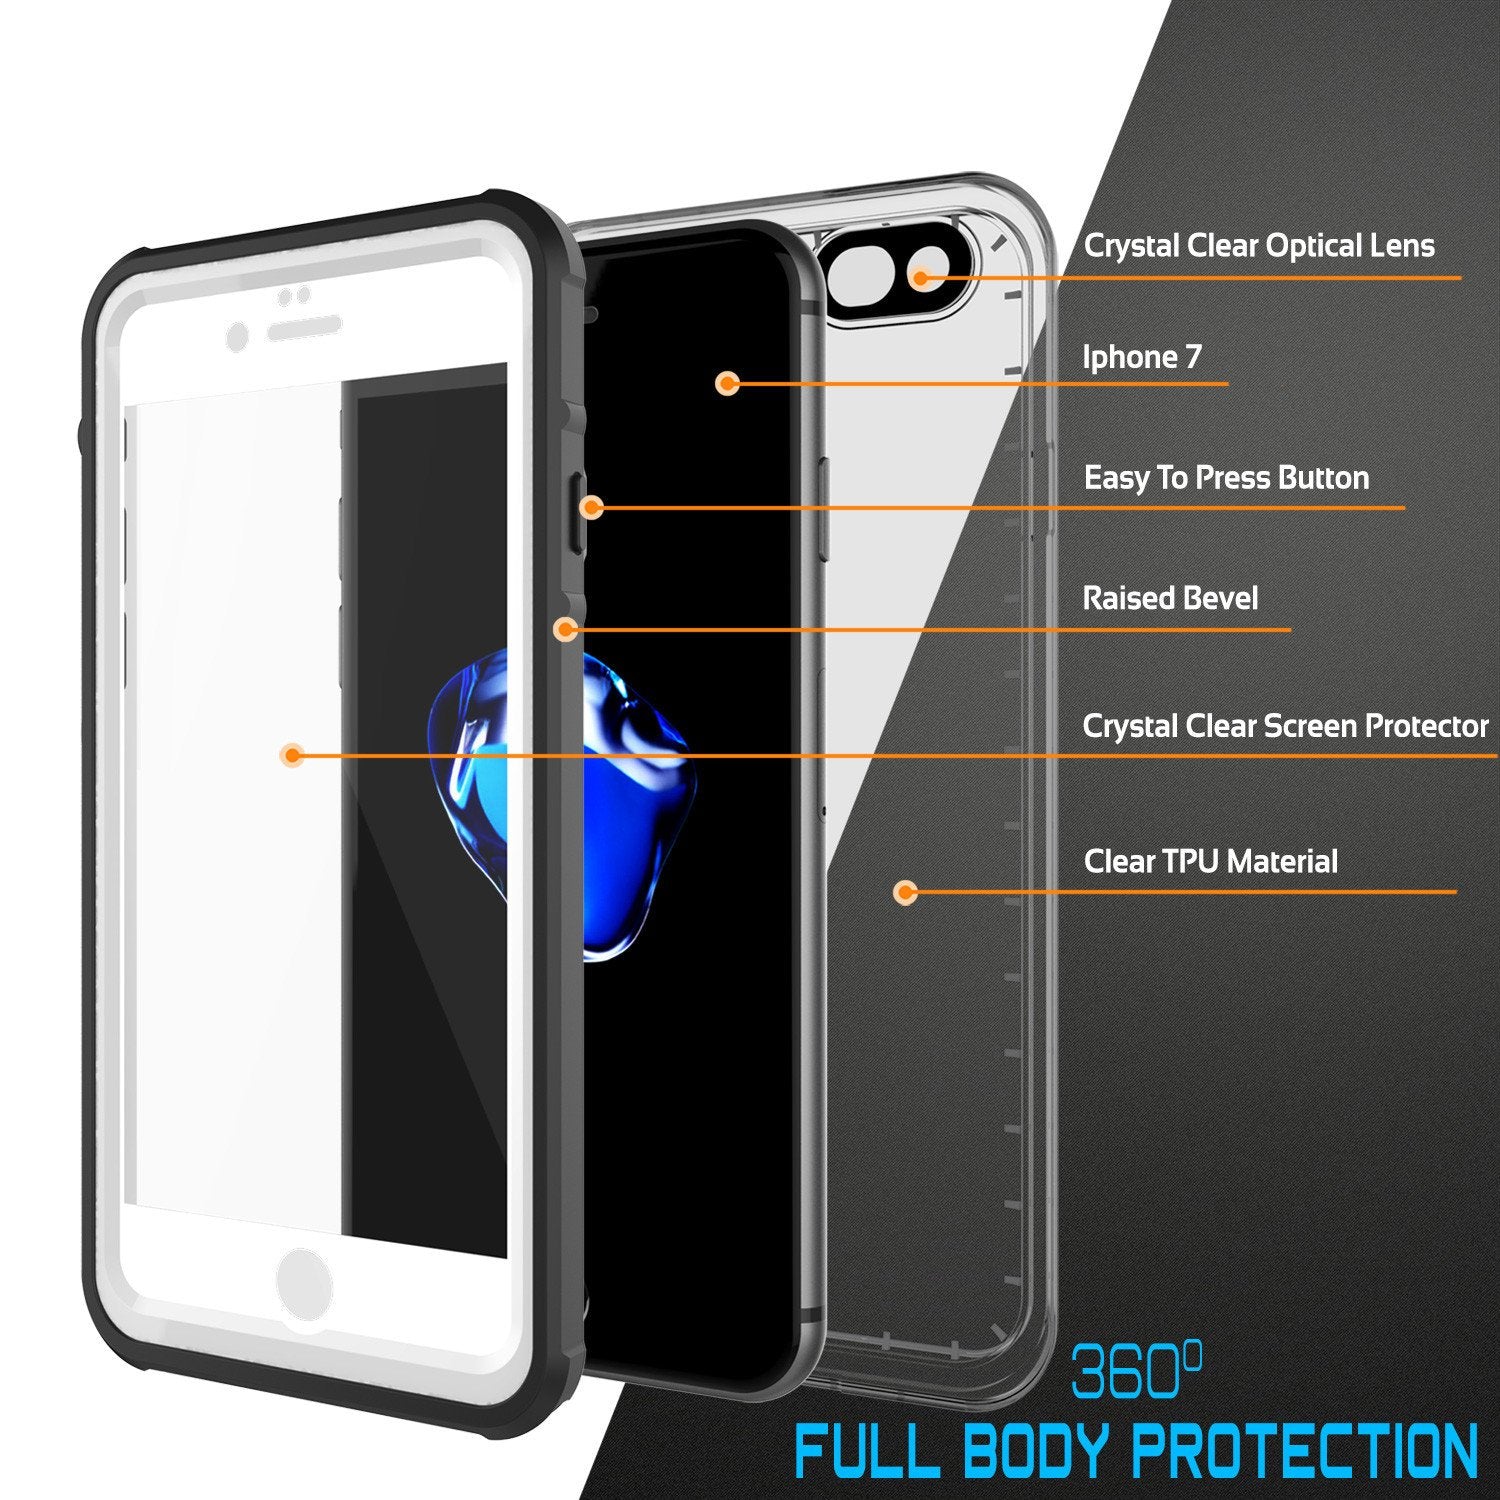 Apple iPhone 7 Waterproof Case, PUNKcase CRYSTAL White W/ Attached Screen Protector  | Warranty